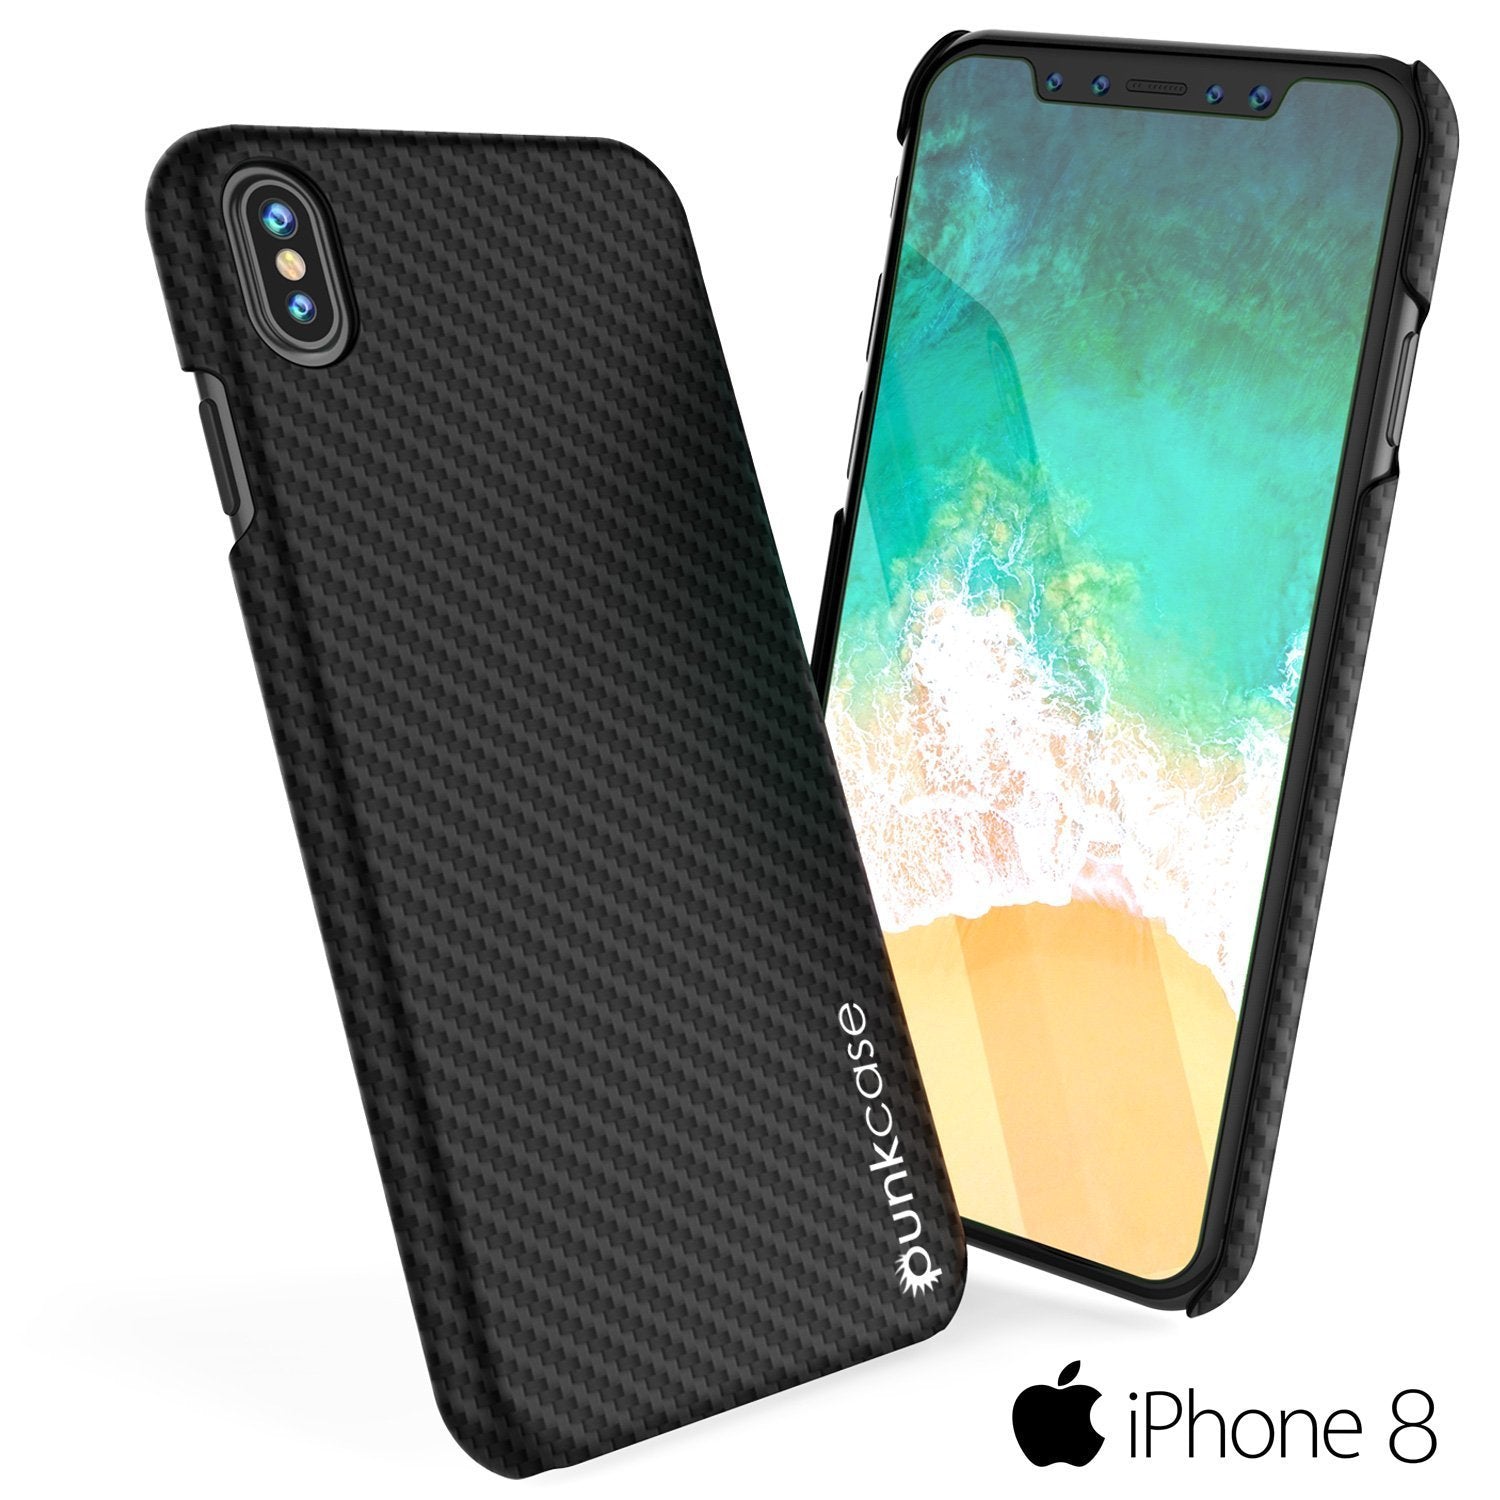 iPhone 8 Case, Punkcase CarbonShield, Heavy Duty & Ultra Thin 2 Piece Dual Layer PU Leather Cover with PUNKSHIELD Screen Protector [Black]